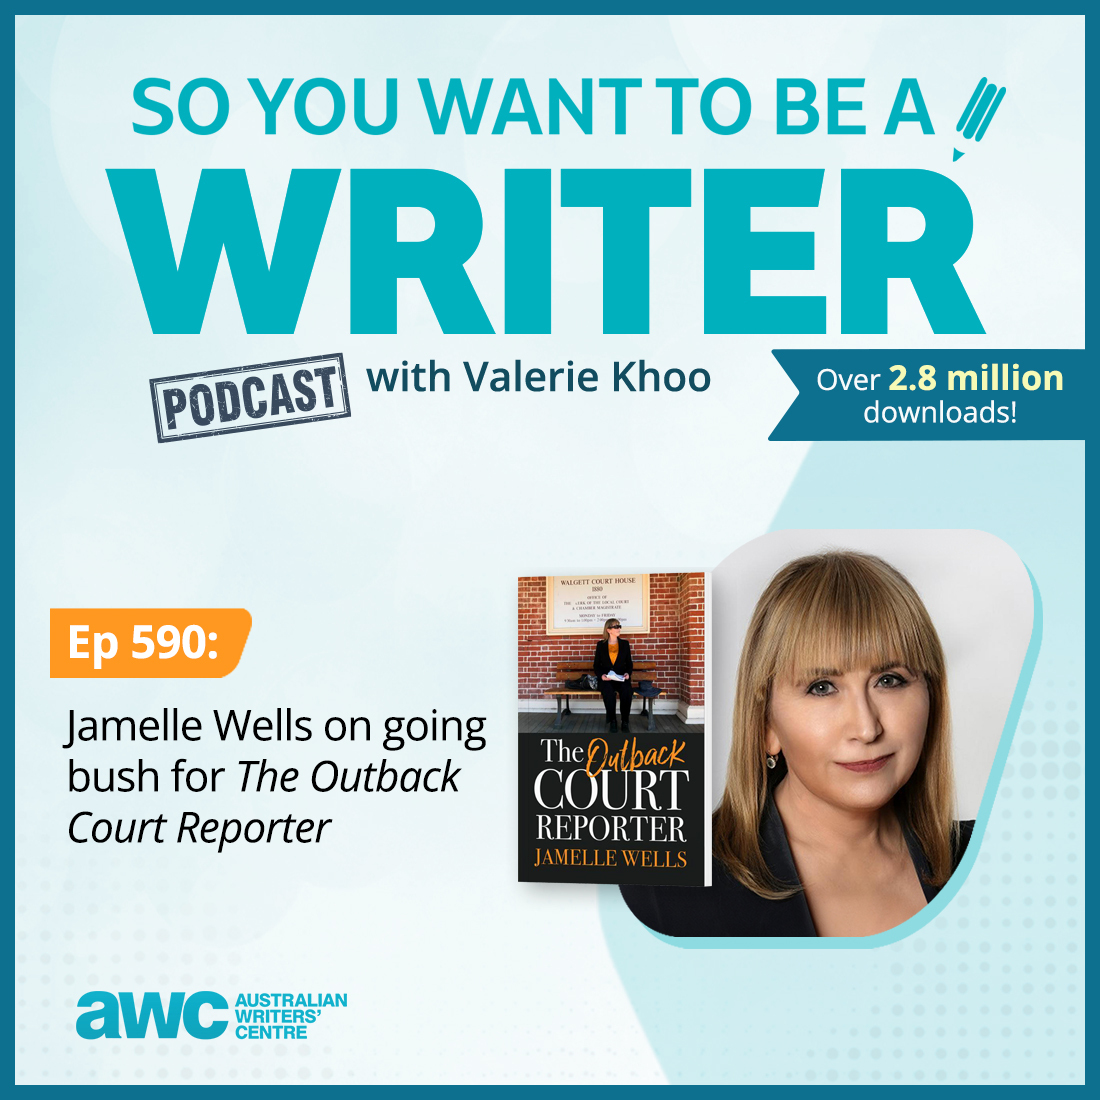 WRITER 590: Jamelle Wells on going bush for 'The Outback Court Reporter'.